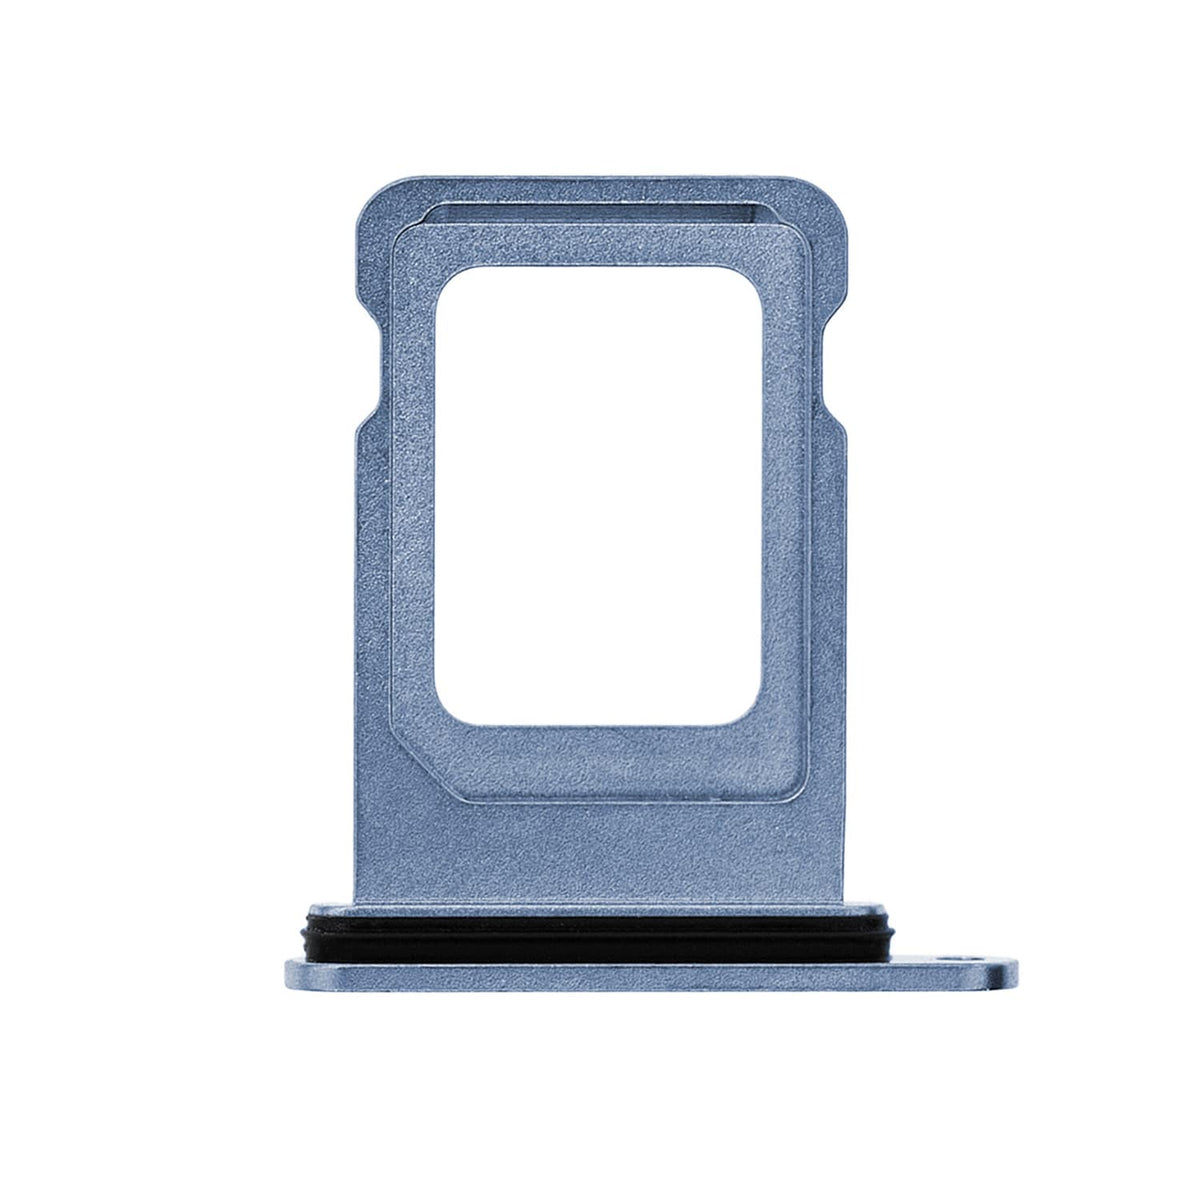 SINGLE SIM CARD TRAY FOR IPHONE 13 PRO/13 PRO MAX  - SIERRA BLUE